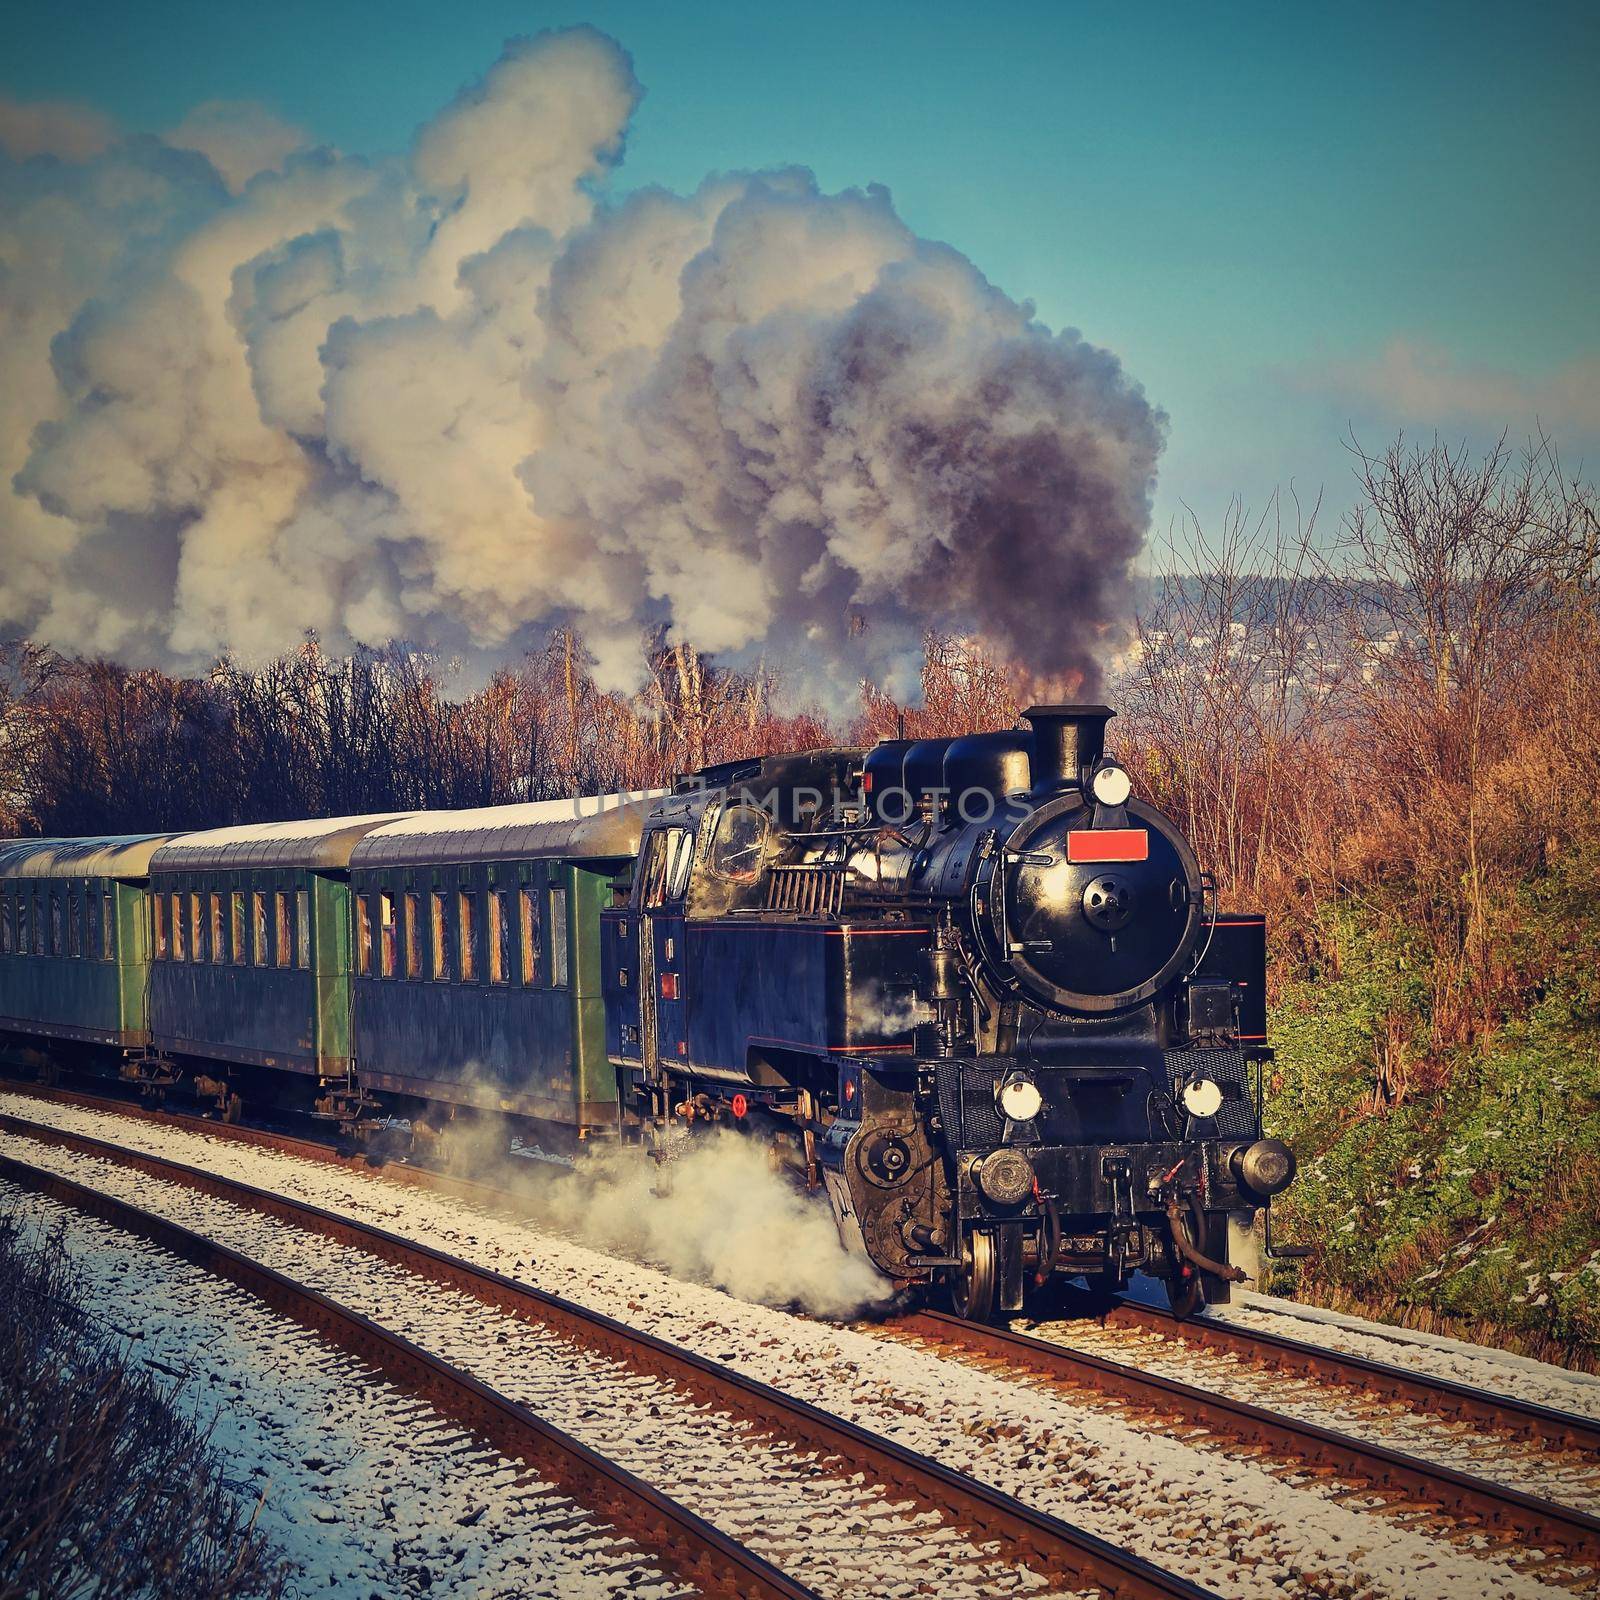 Beautiful old steam train with wagons running on rails at sunset. Excursions for children and parents on festive special days. Czech Republic Europe. by Montypeter